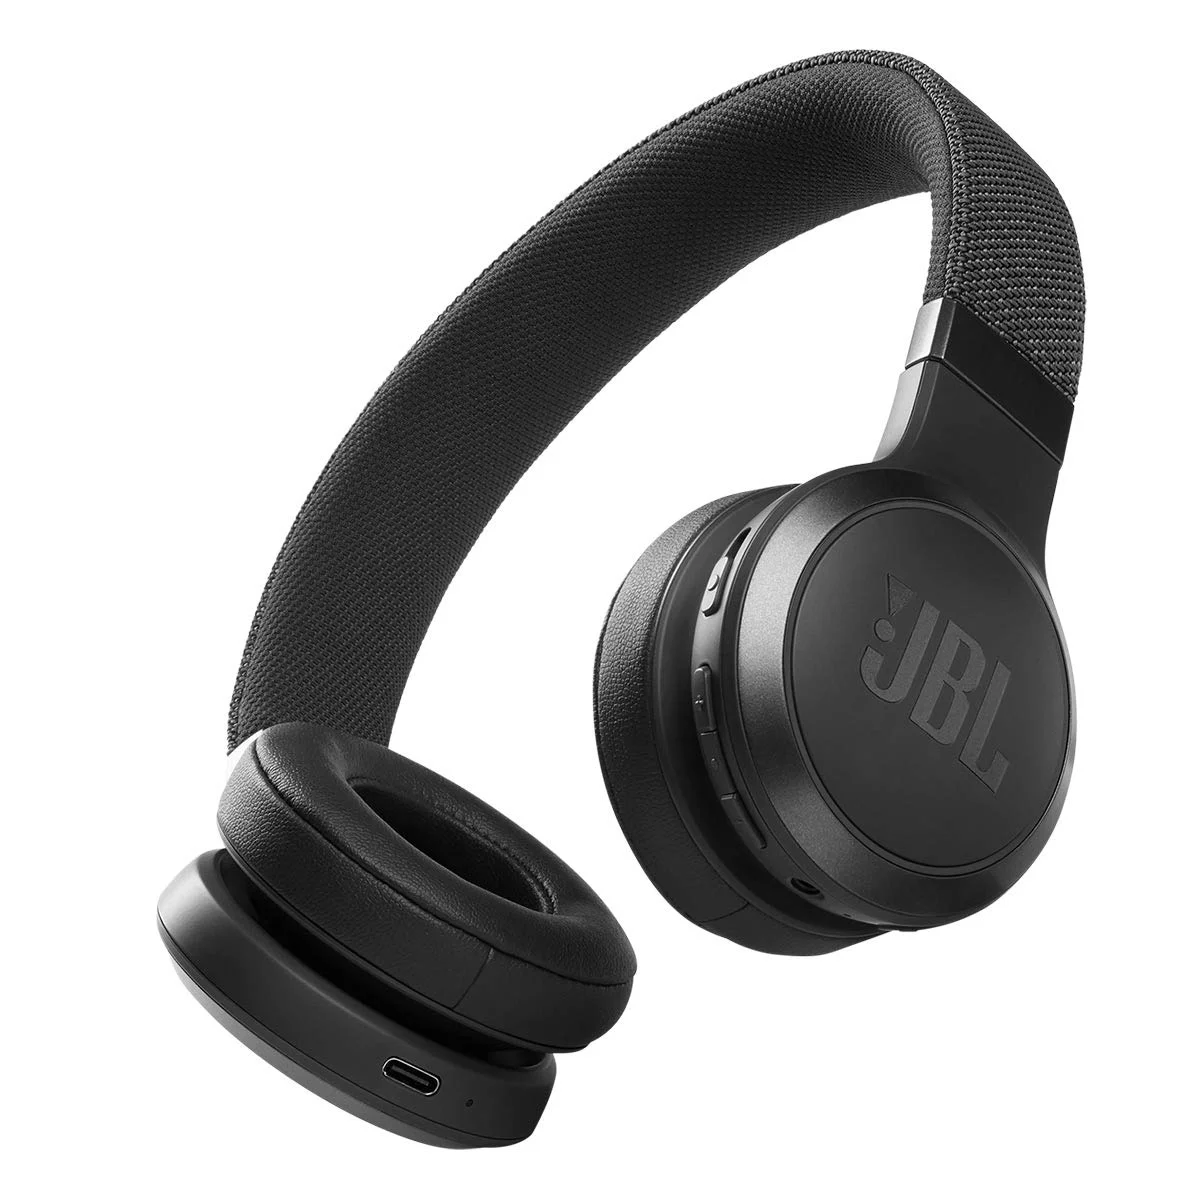 Wireless Bluetooth Headphones Review: JBL Tune 710BT, by Author